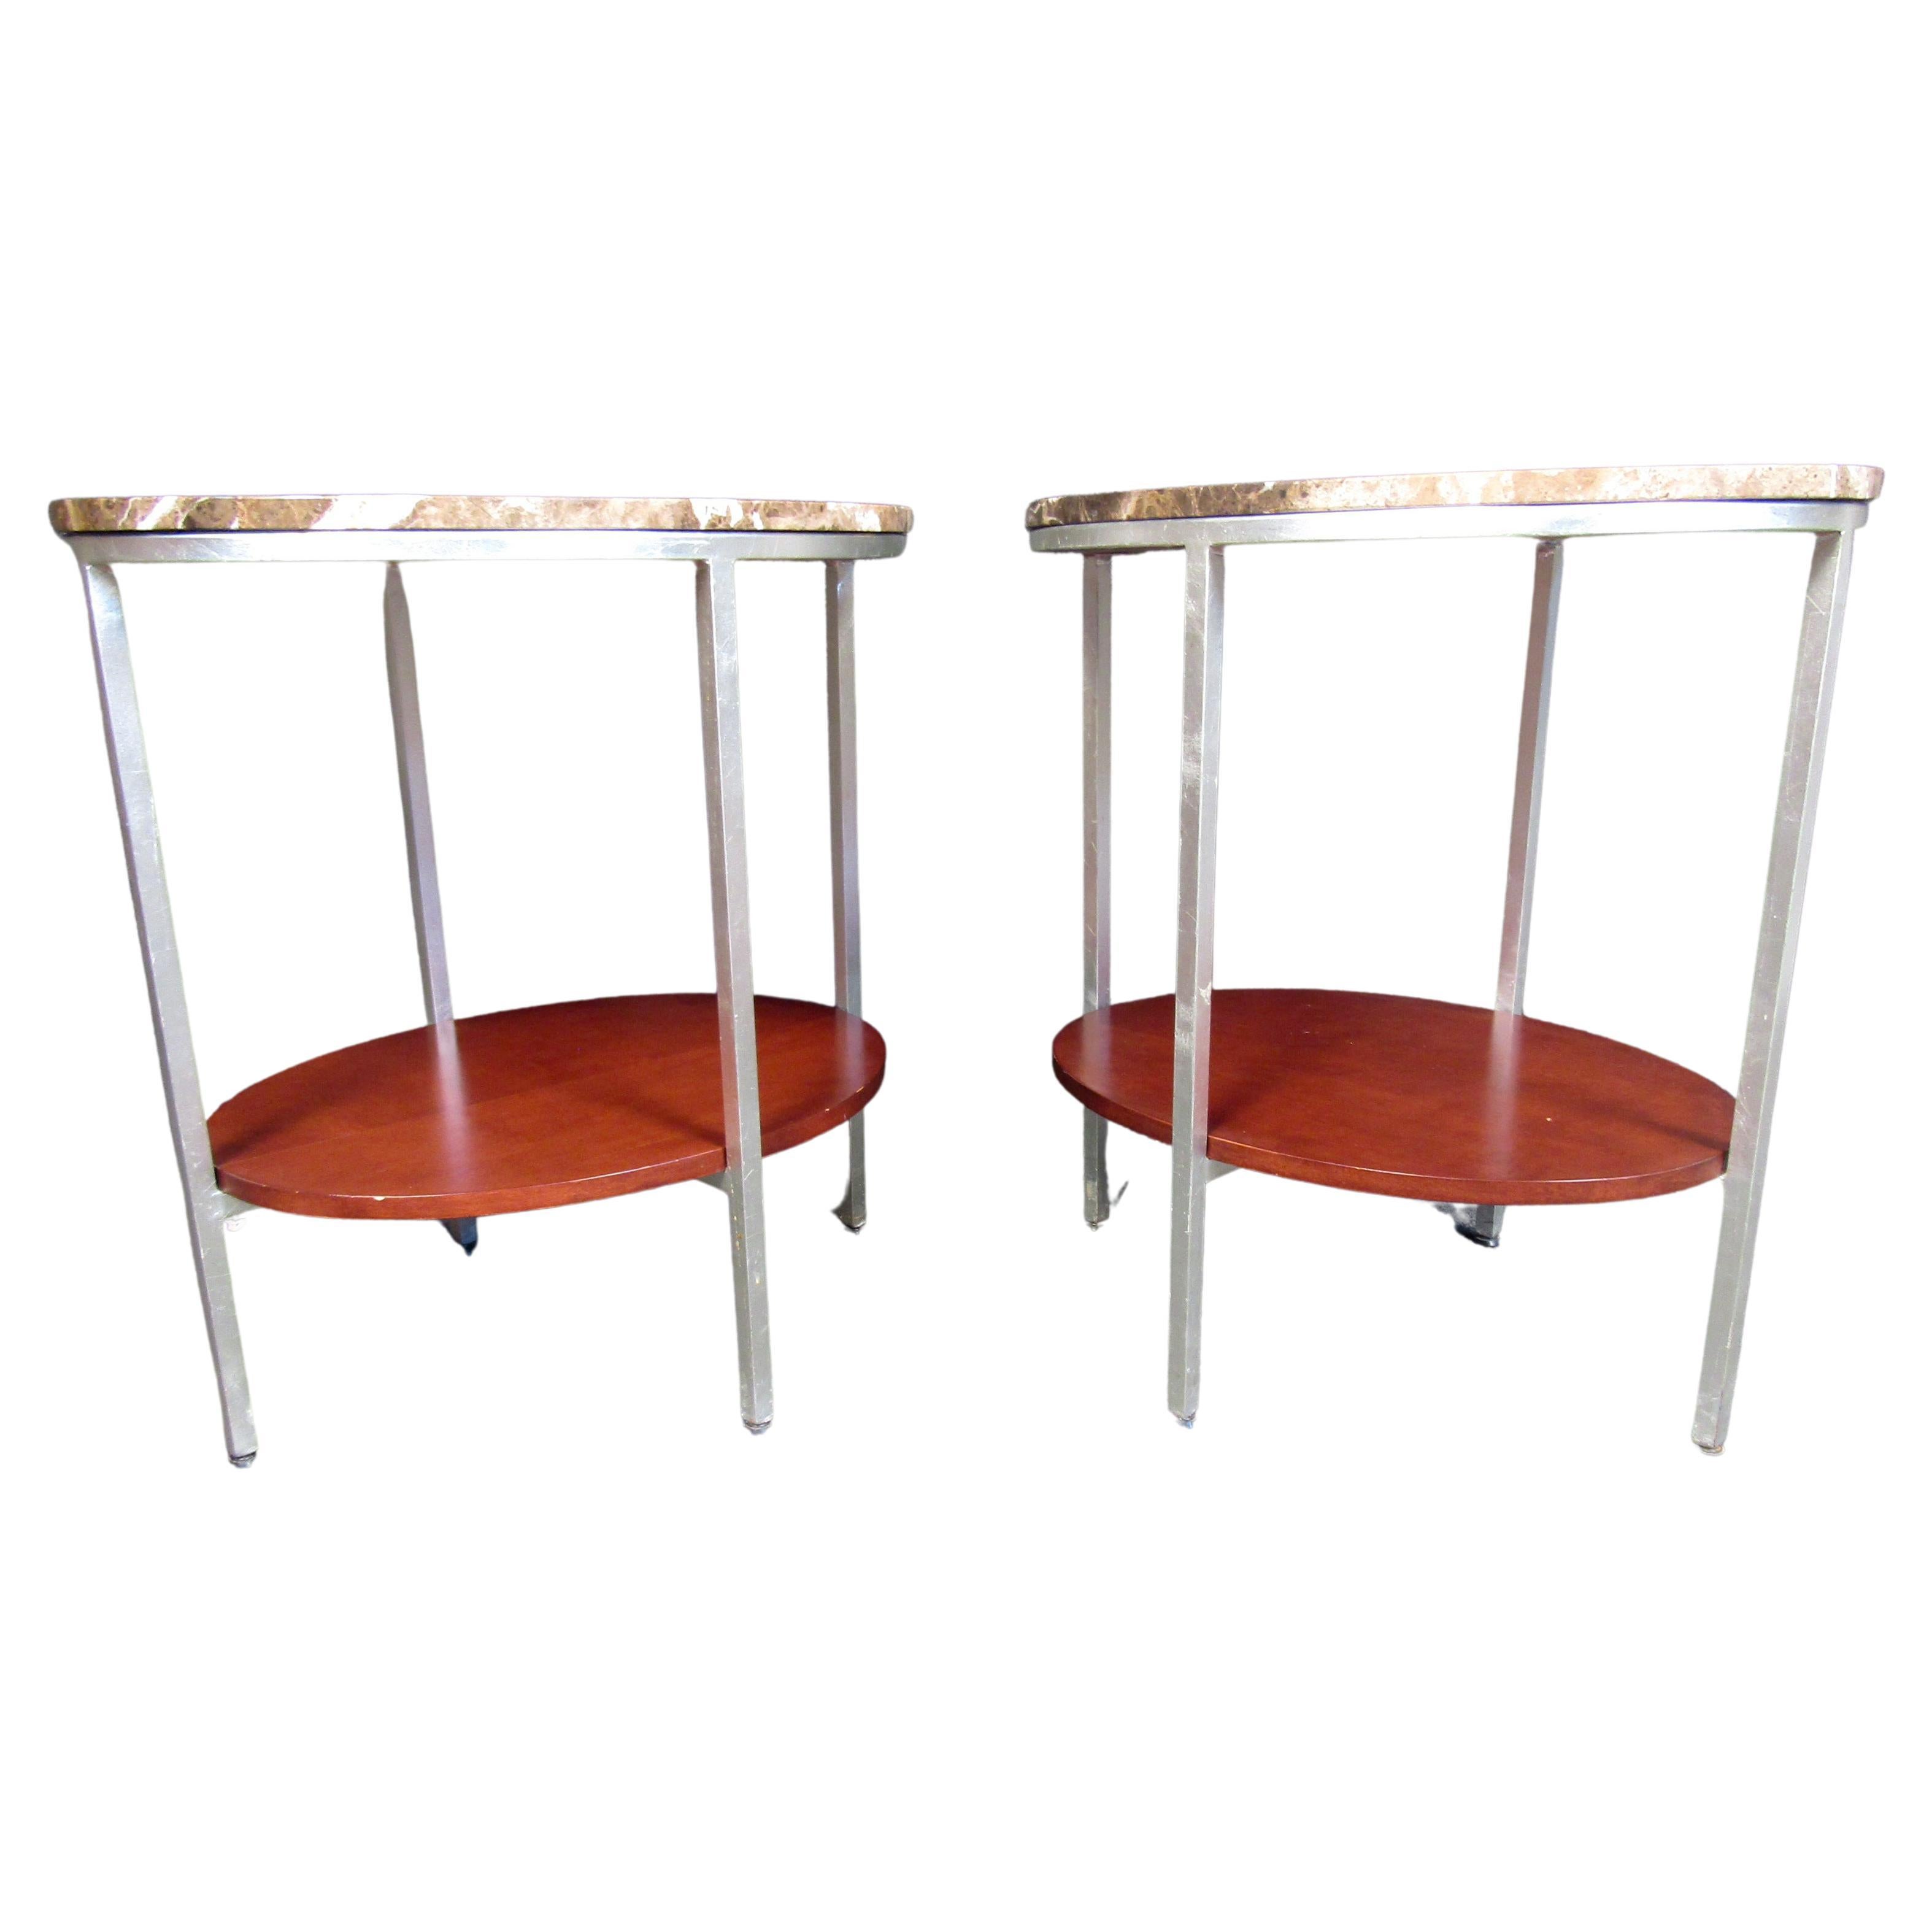 These two tier mid century style end tables feature a beautiful marble top, wood second tier and stunning metal construct. This pair of tables will be sure to add pop to your living or office space. Please confirm item location (NJ or NY).